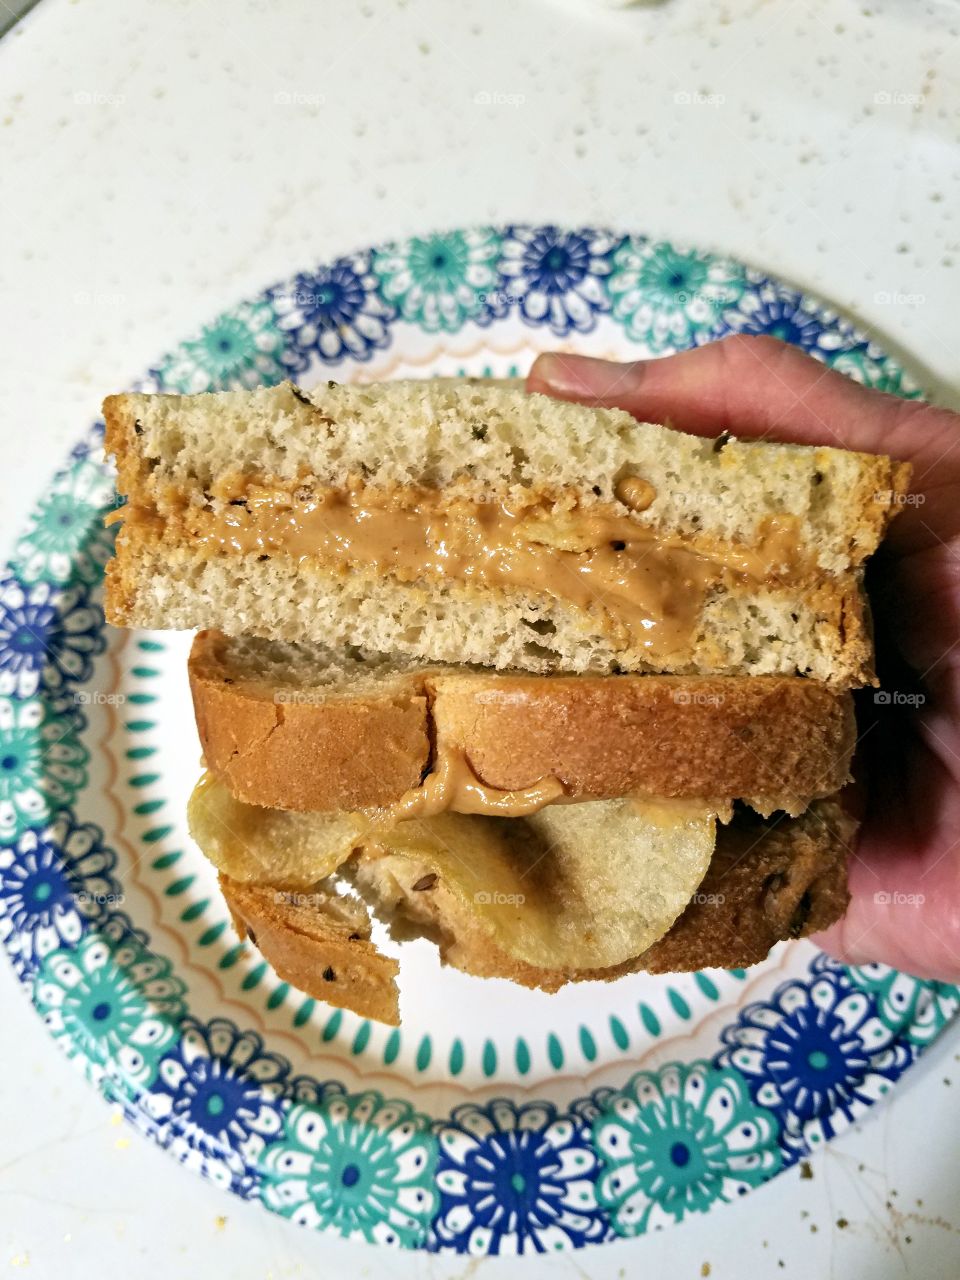 Peanut butter and potato chips on rye!